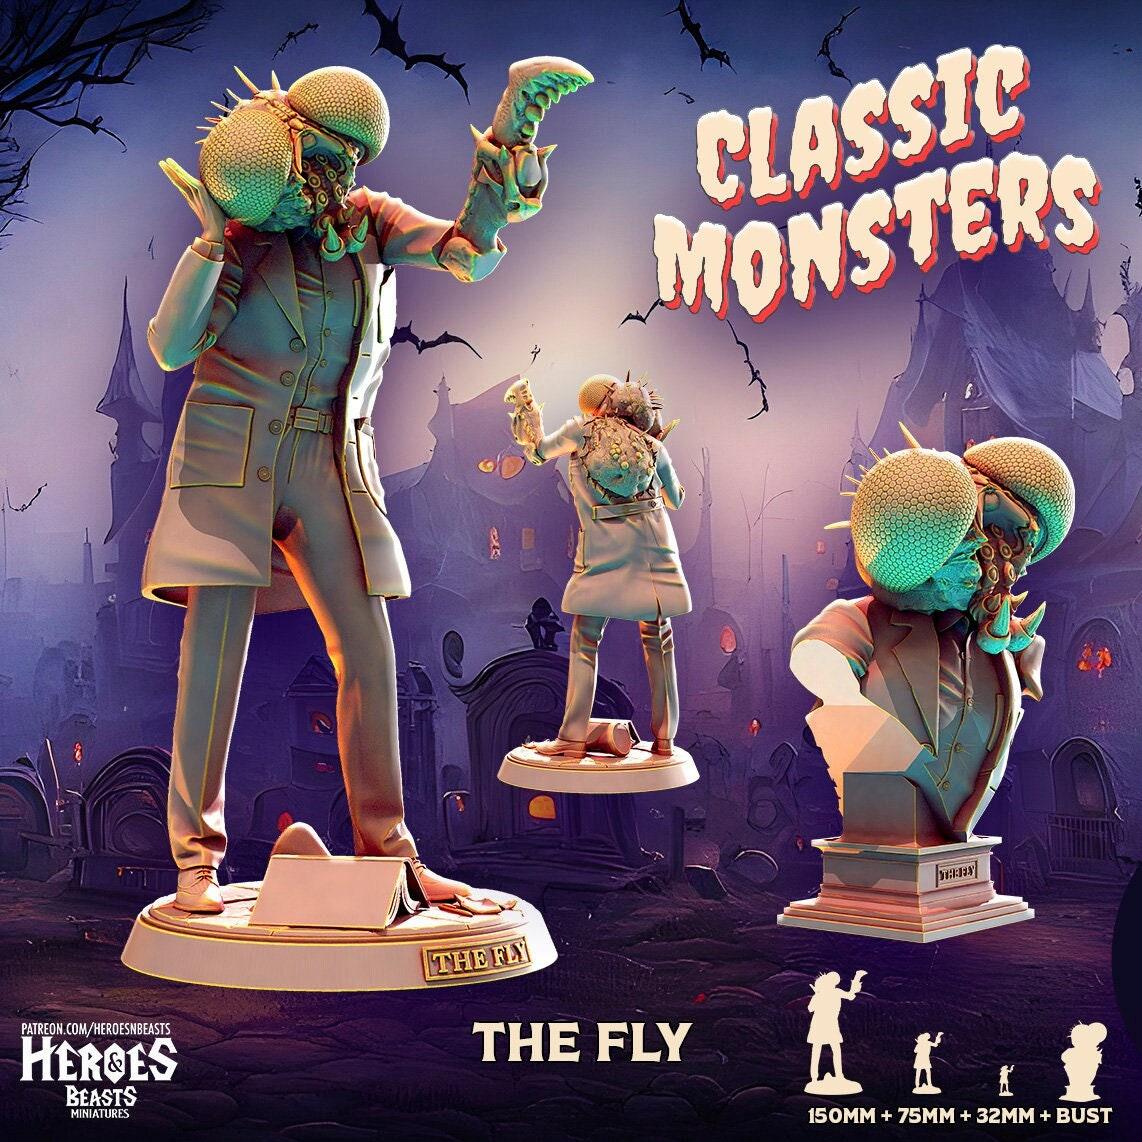 The Fly Miniature Bust Miniature Resin Display Piece | Classic Monsters | DnD Miniature | Dungeons and Dragons, DnD 5e Feature Film Theatre - Plague Miniatures shop for DnD Miniatures